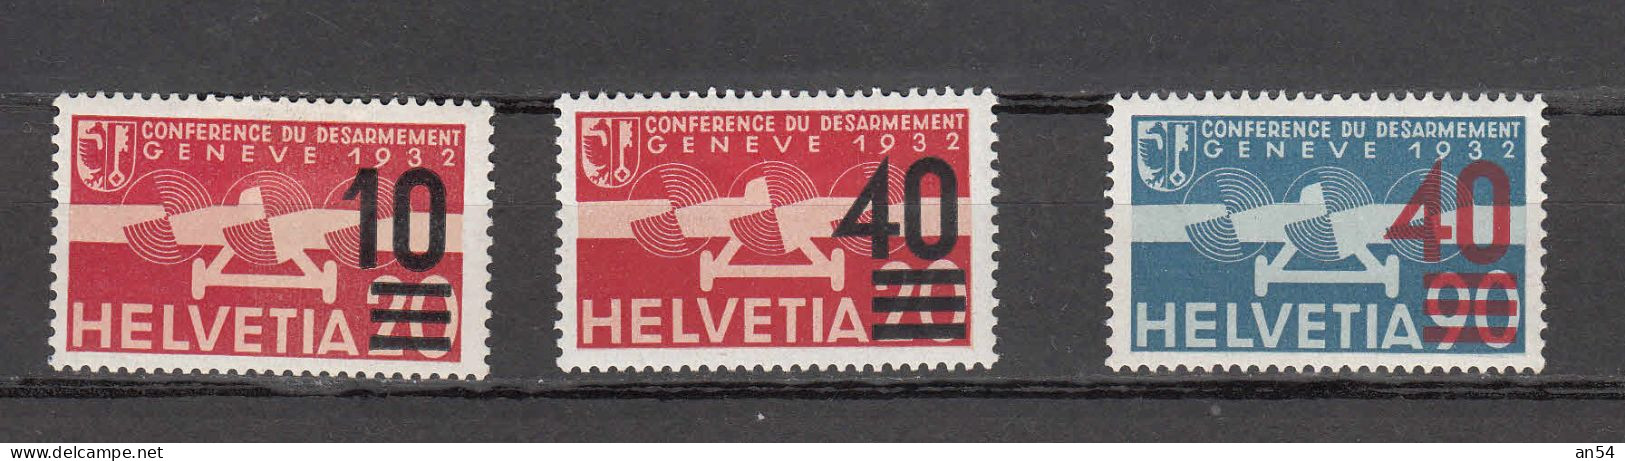 1935/38  PA   N° F21 - F25 - F24  NEUFS*  COTE 30.00   CATALOGUE   SBK - Unused Stamps